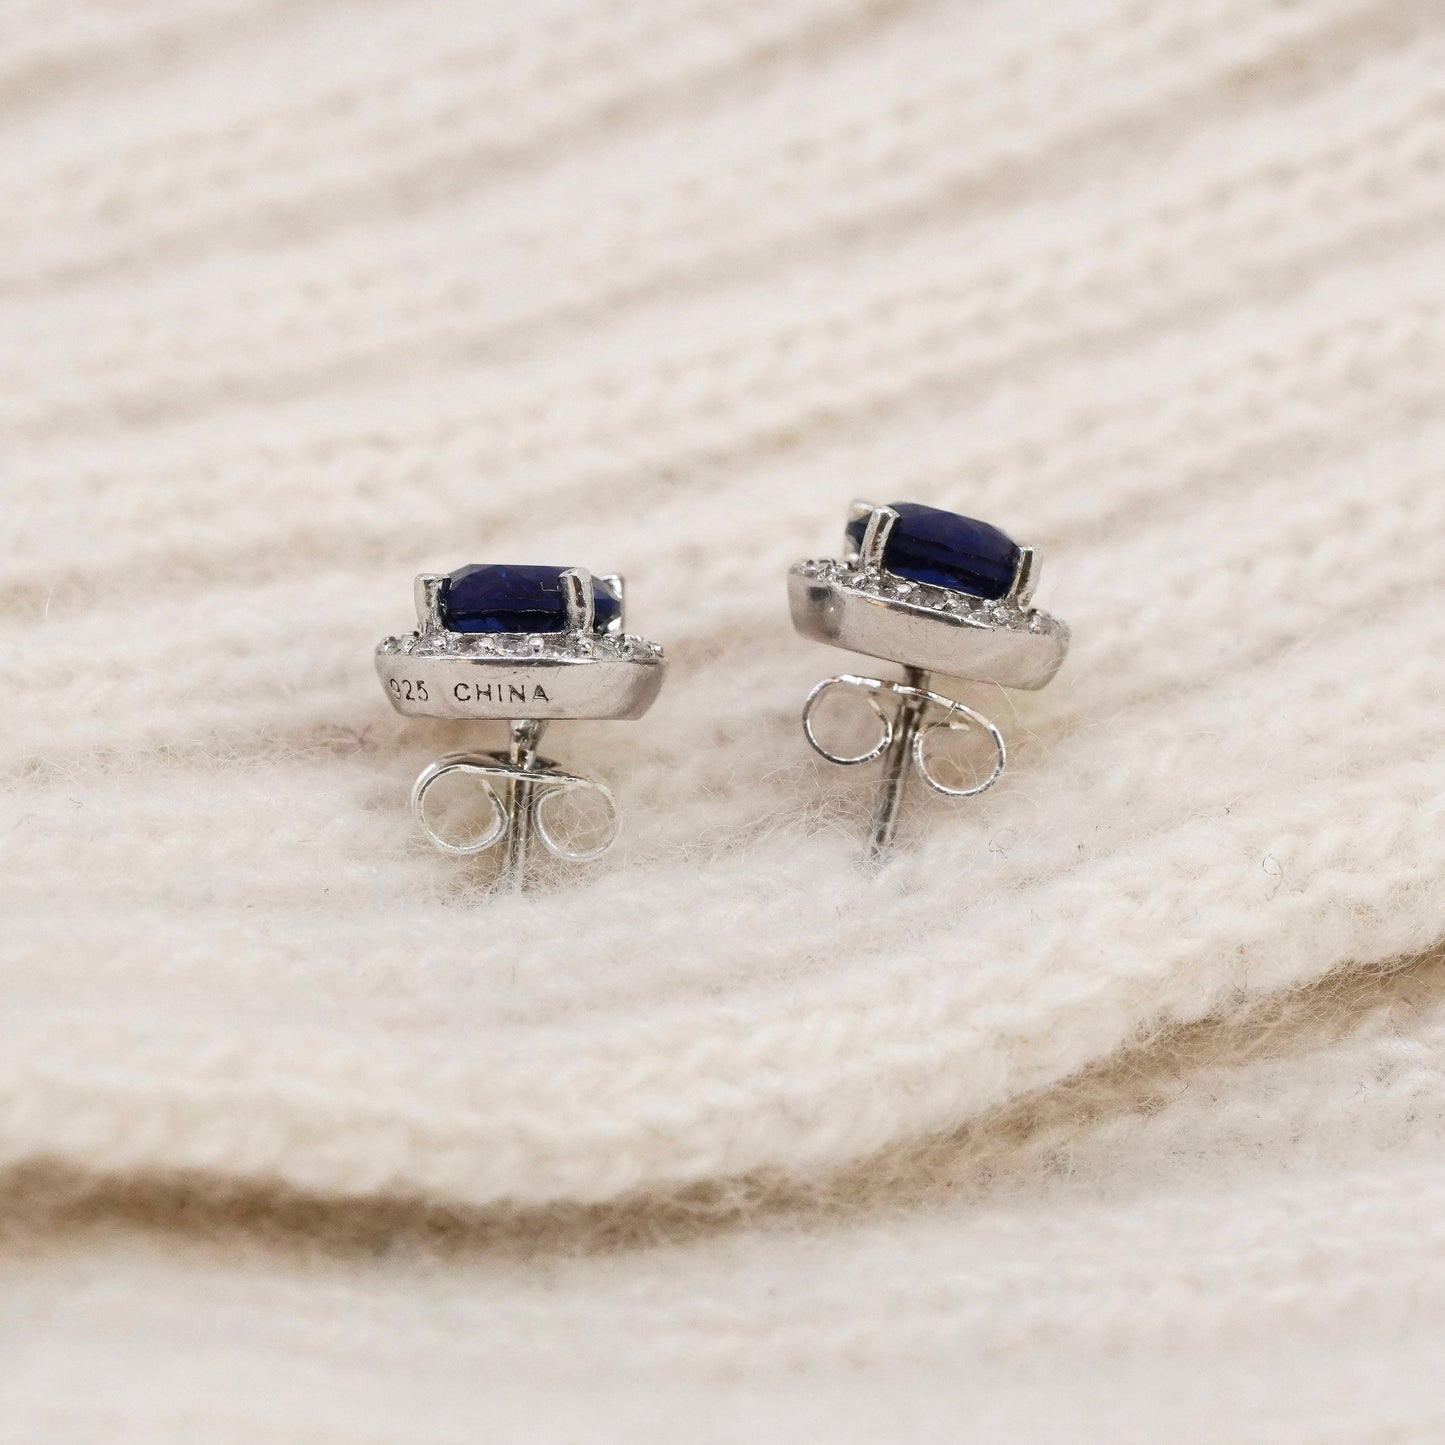 Vintage Sterling silver handmade earrings, 925 studs with sapphire cluster Cz